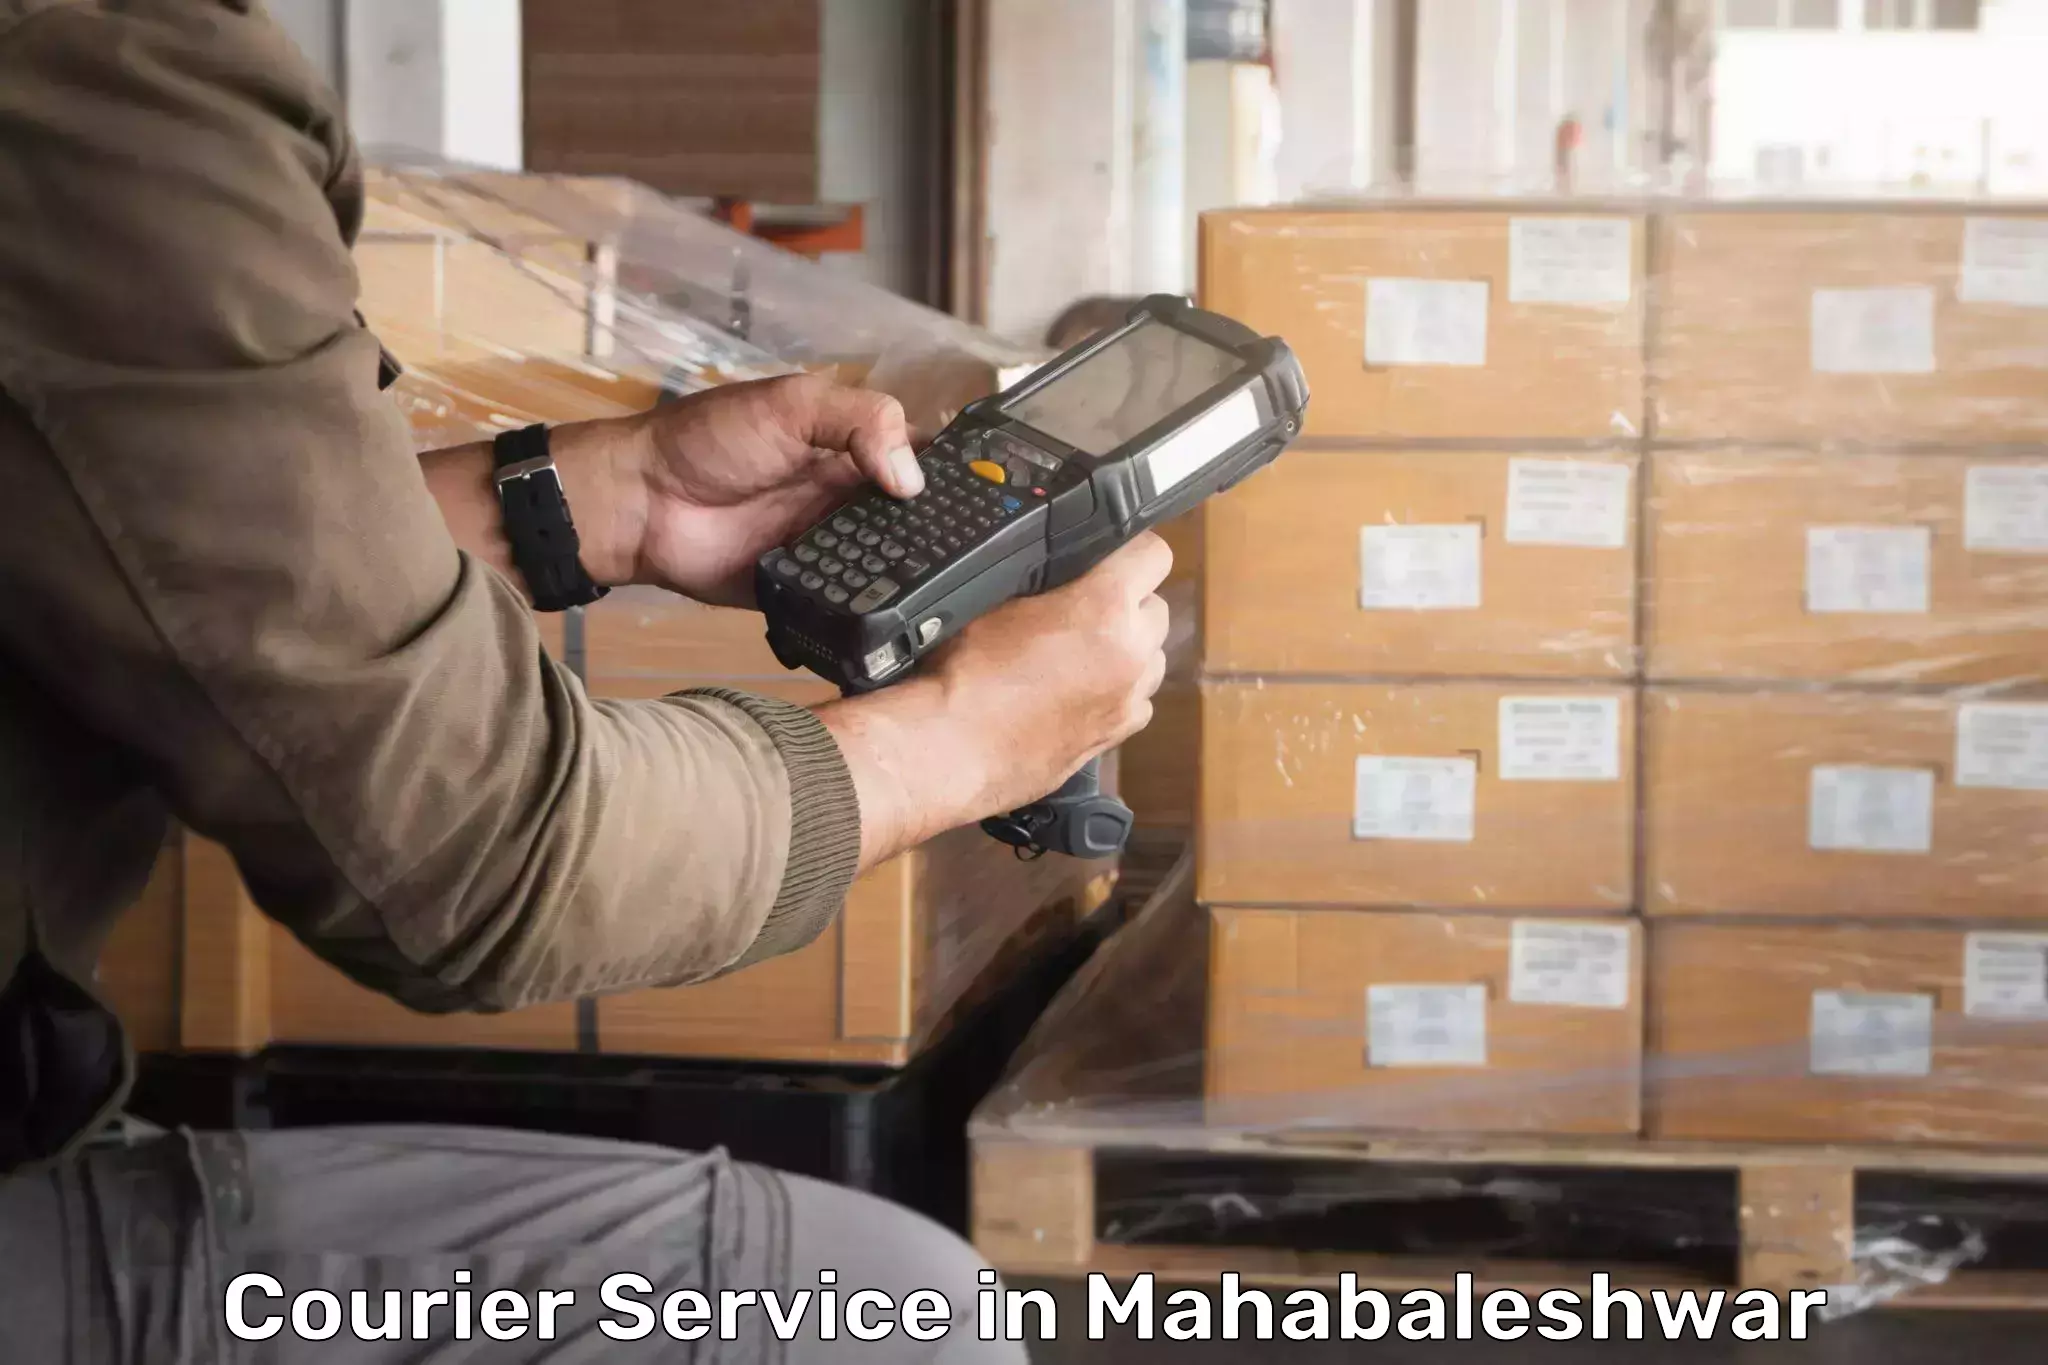 Parcel handling and care in Mahabaleshwar